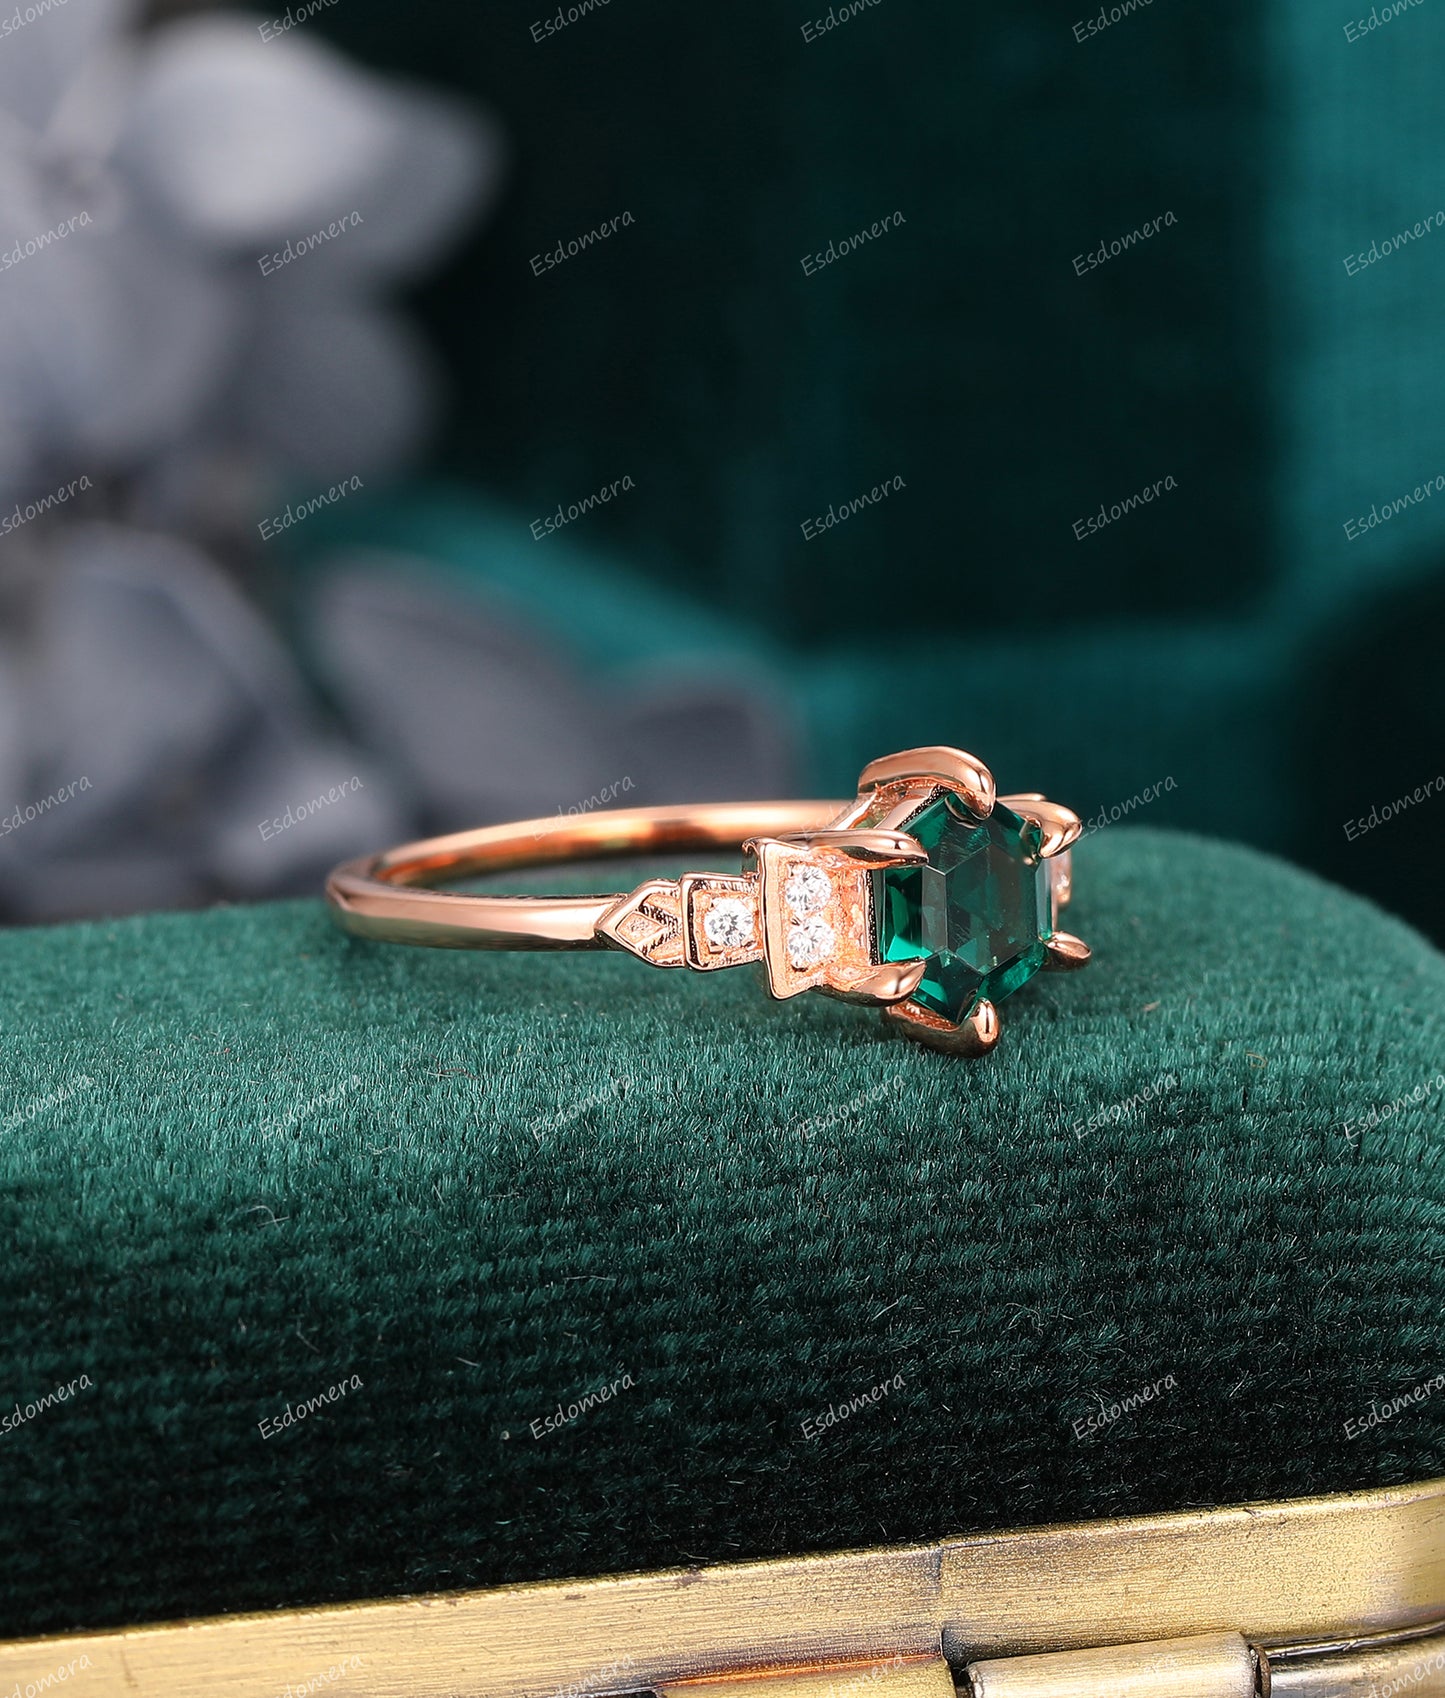 Hexagon Cut 0.85CT Emerald Ring, Moissanite Accent Wedding Ring, Delicate 14K Rose Gold Ring